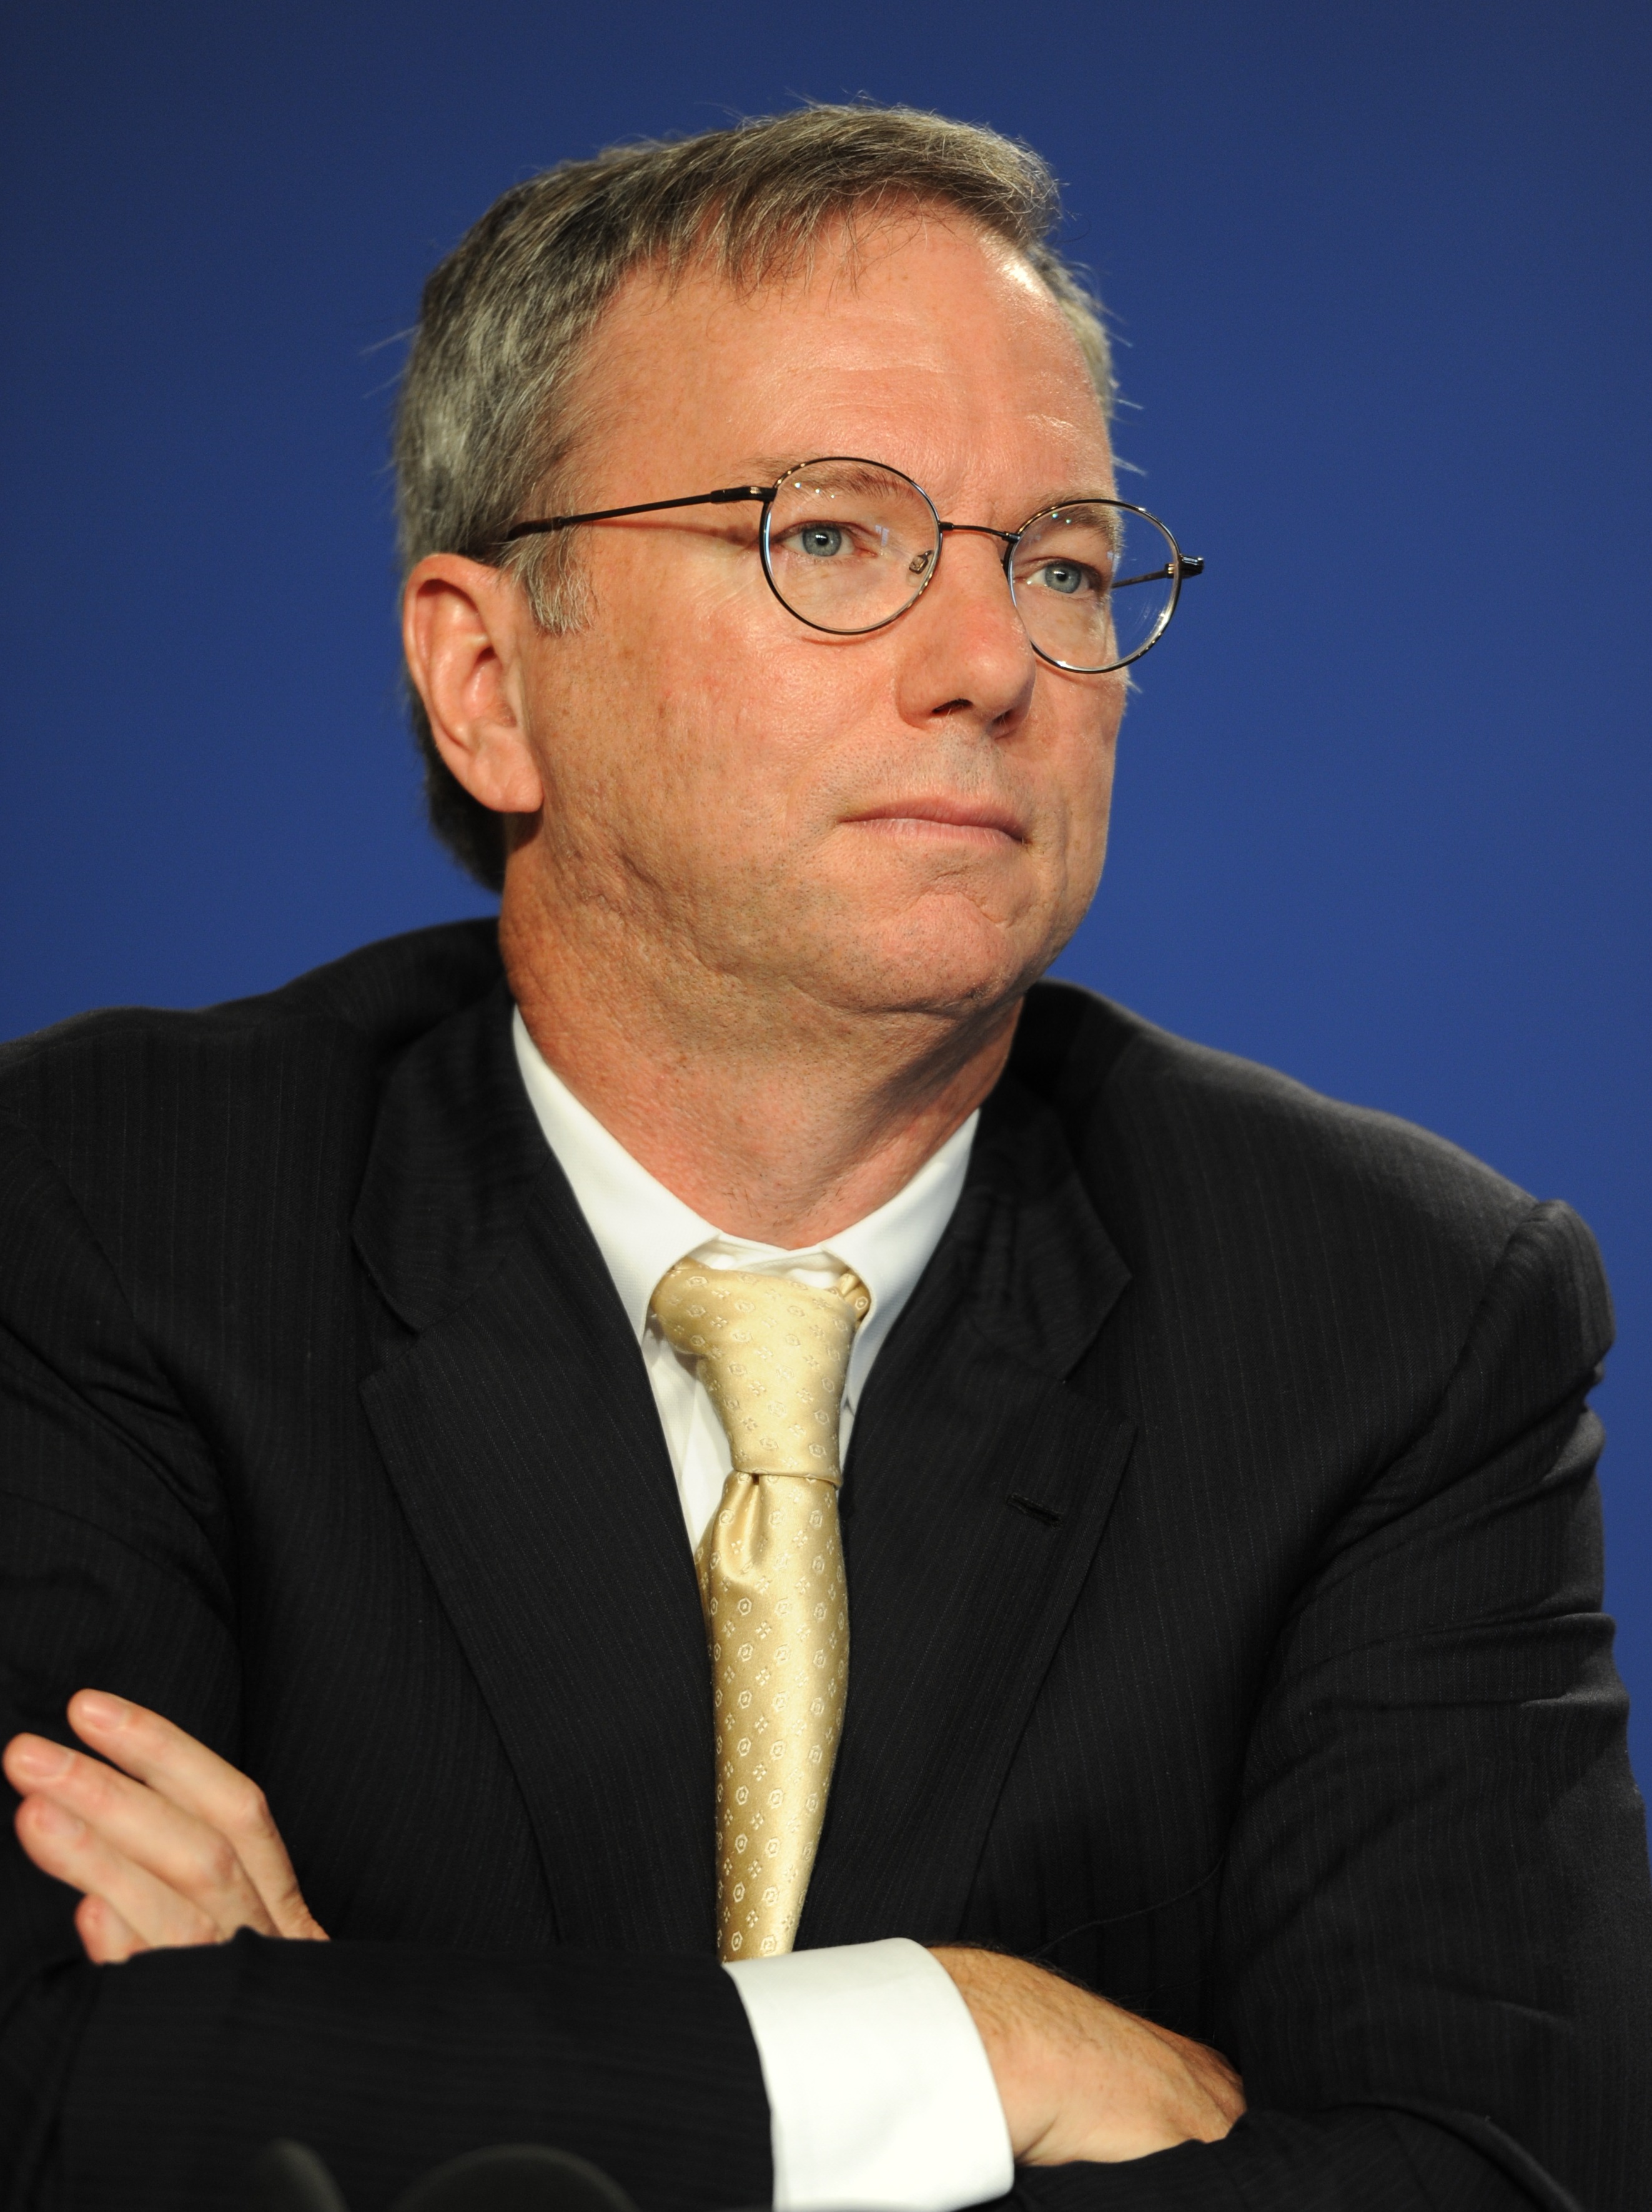 30 Awesome Things You Probably Didn't Know About Eric Schmidt BOOMSbeat